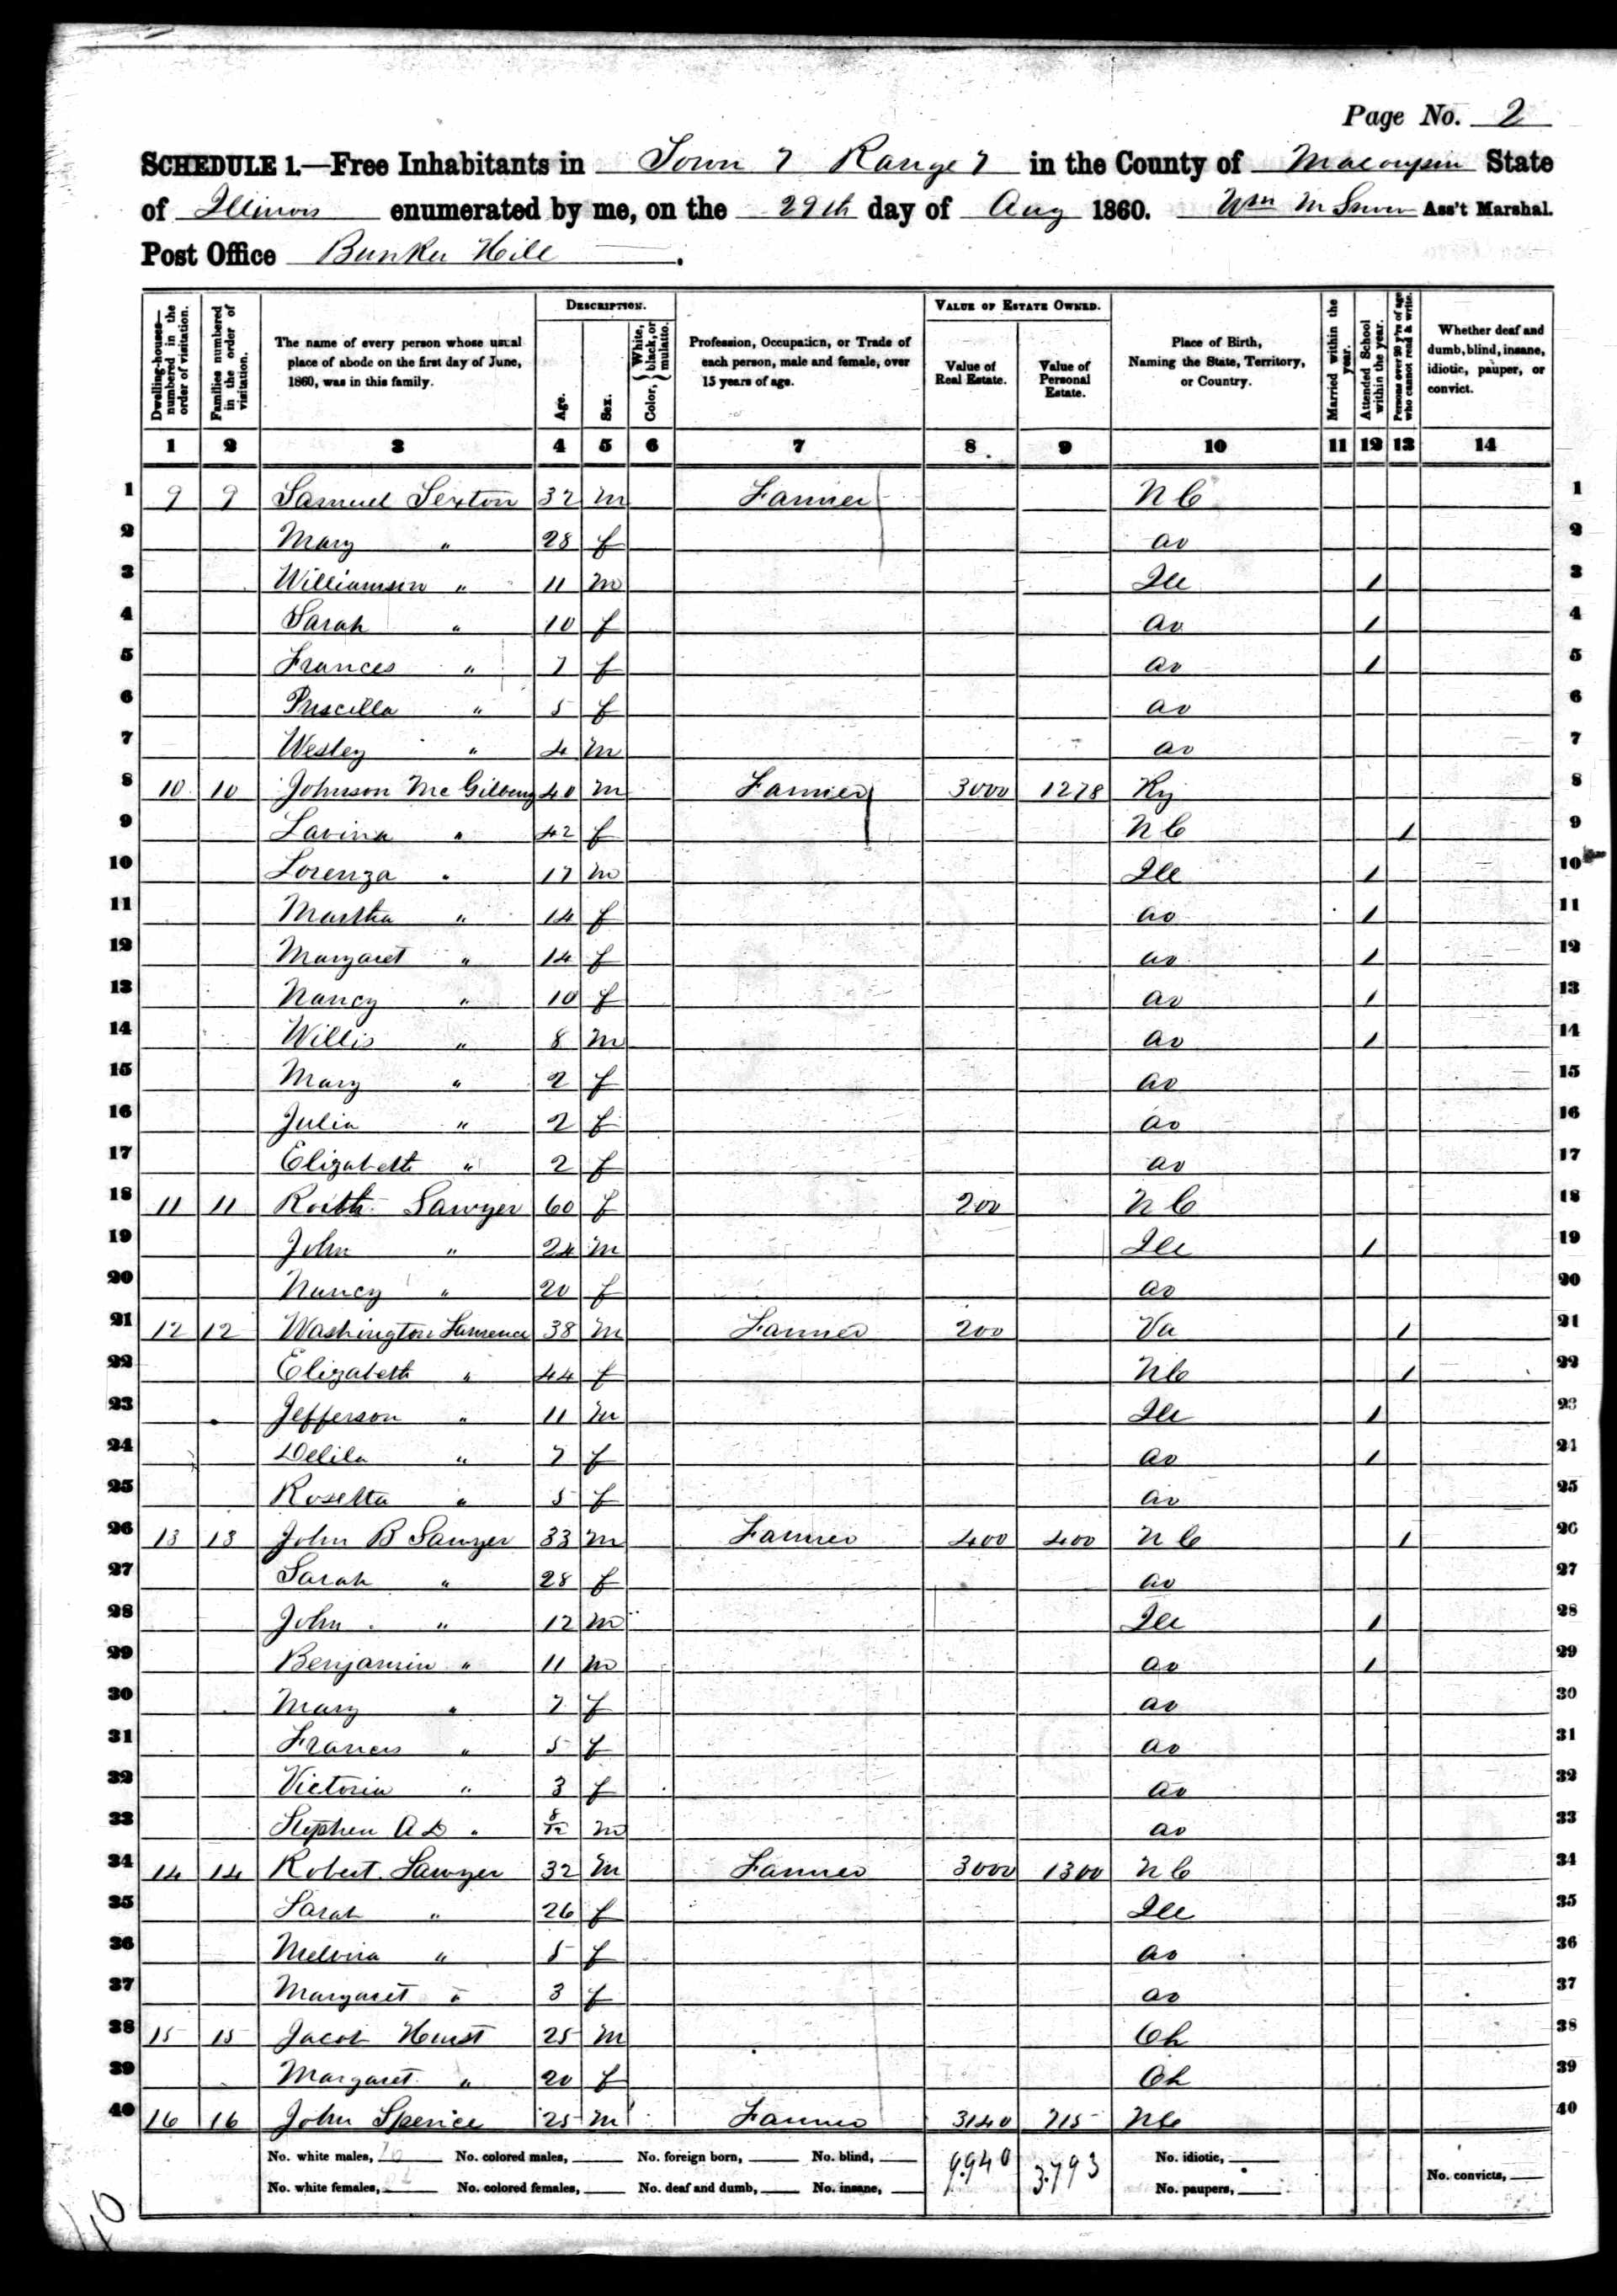 John Spence and wife Mary (Walker) Spence, 1860 Macoupin County, Illinois, census. Mary was the daughter of John McLean Walker and his first wife, Dinah Moore.